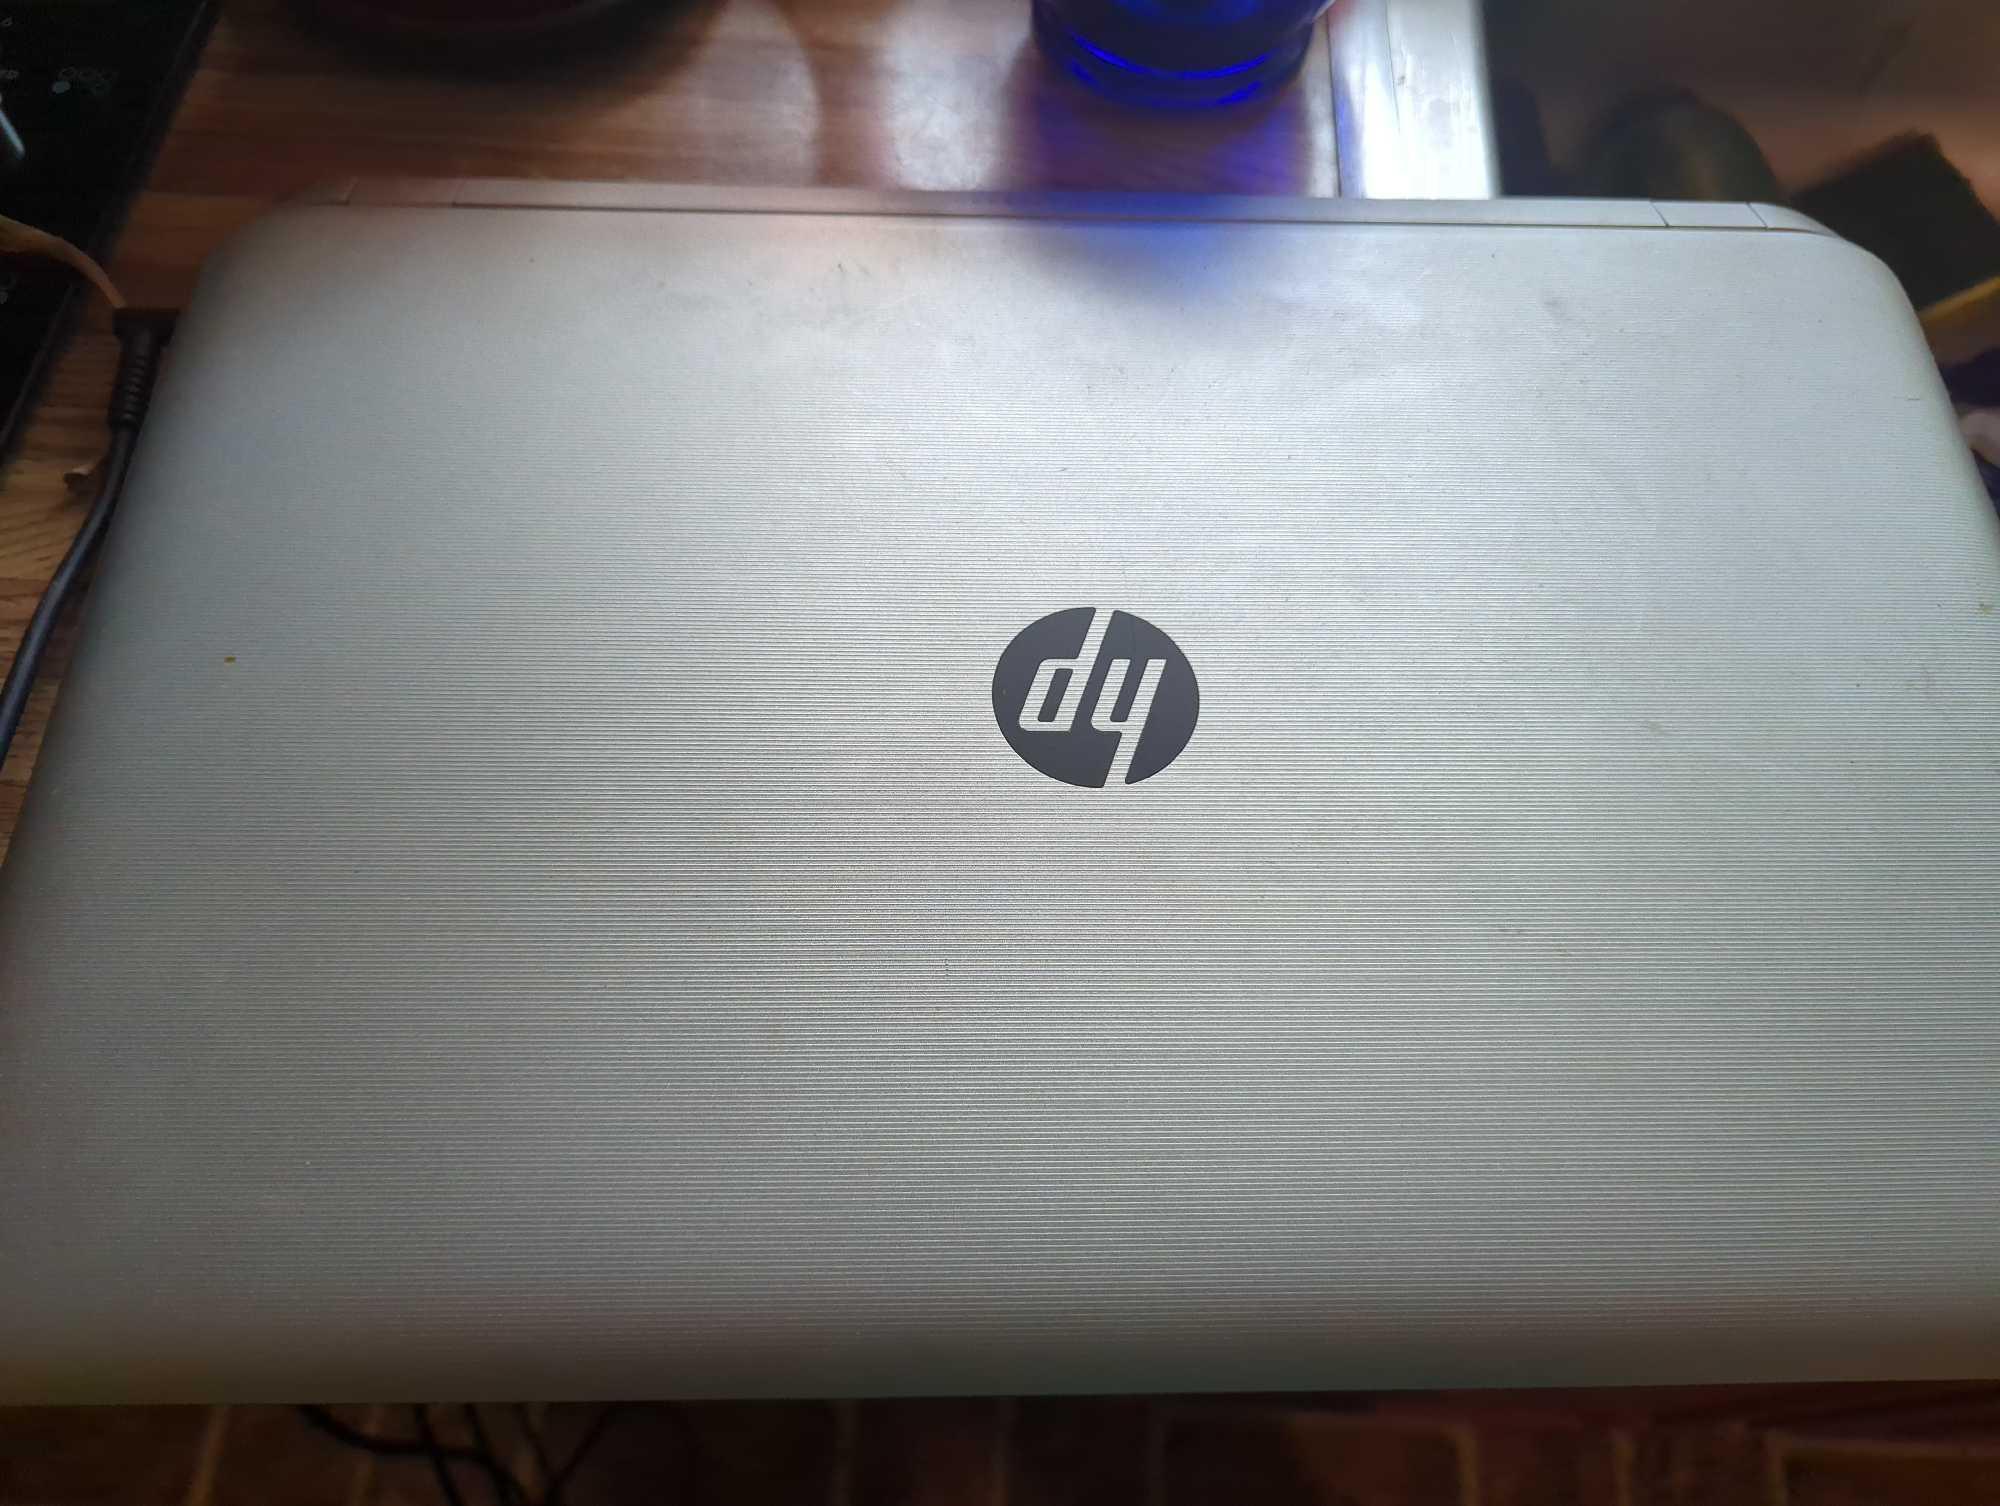 (KIT) HP 15.6" PENTIUM 4GB/128GB LAPTOP, SILVER, CHARGER INCLUDED, RETAIL PRICE $435, ITEM IS